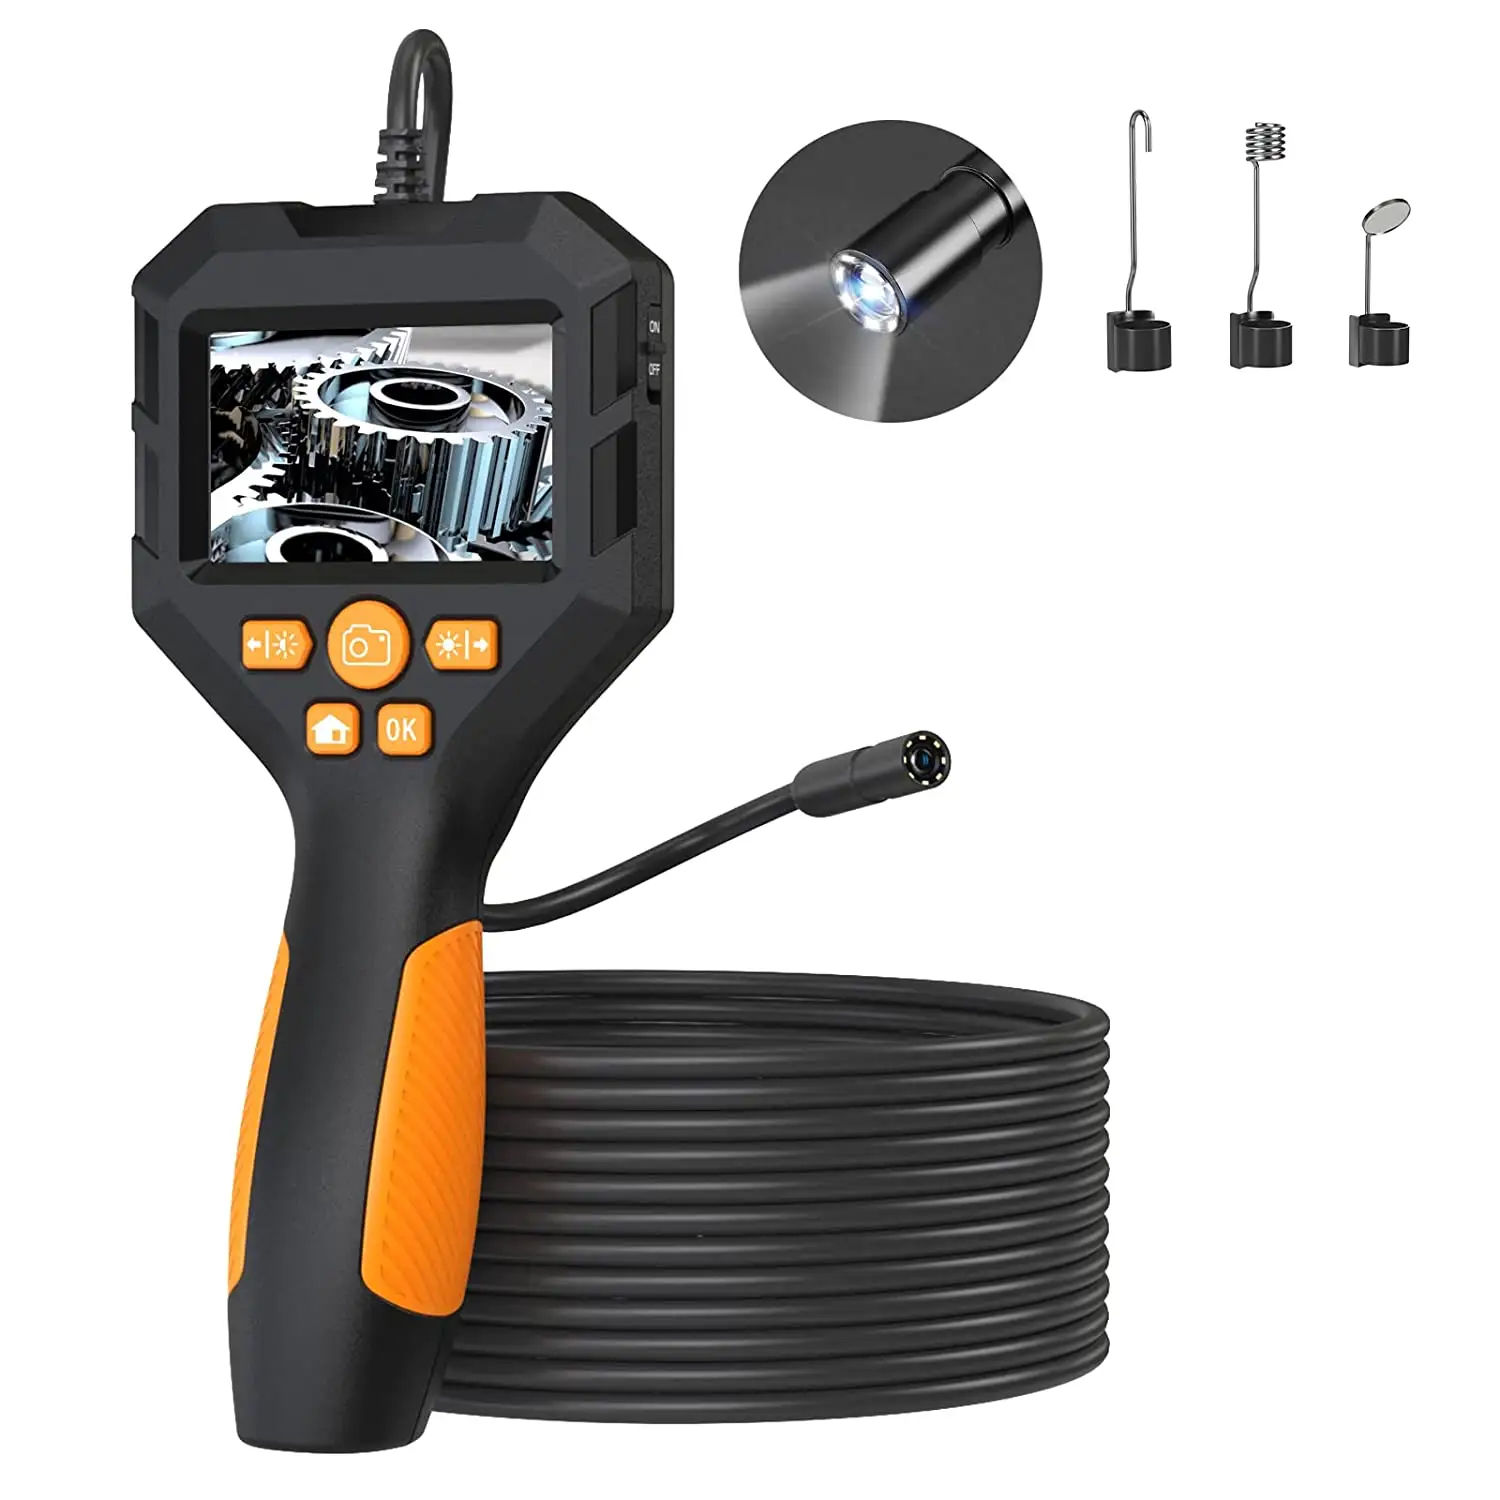 P10 Industrial Endoscope 1080P Digital Borescope 5.5mm Waterproof Snake Scope Camera 2.8-inch IPS Screen with LED Light for Pipe